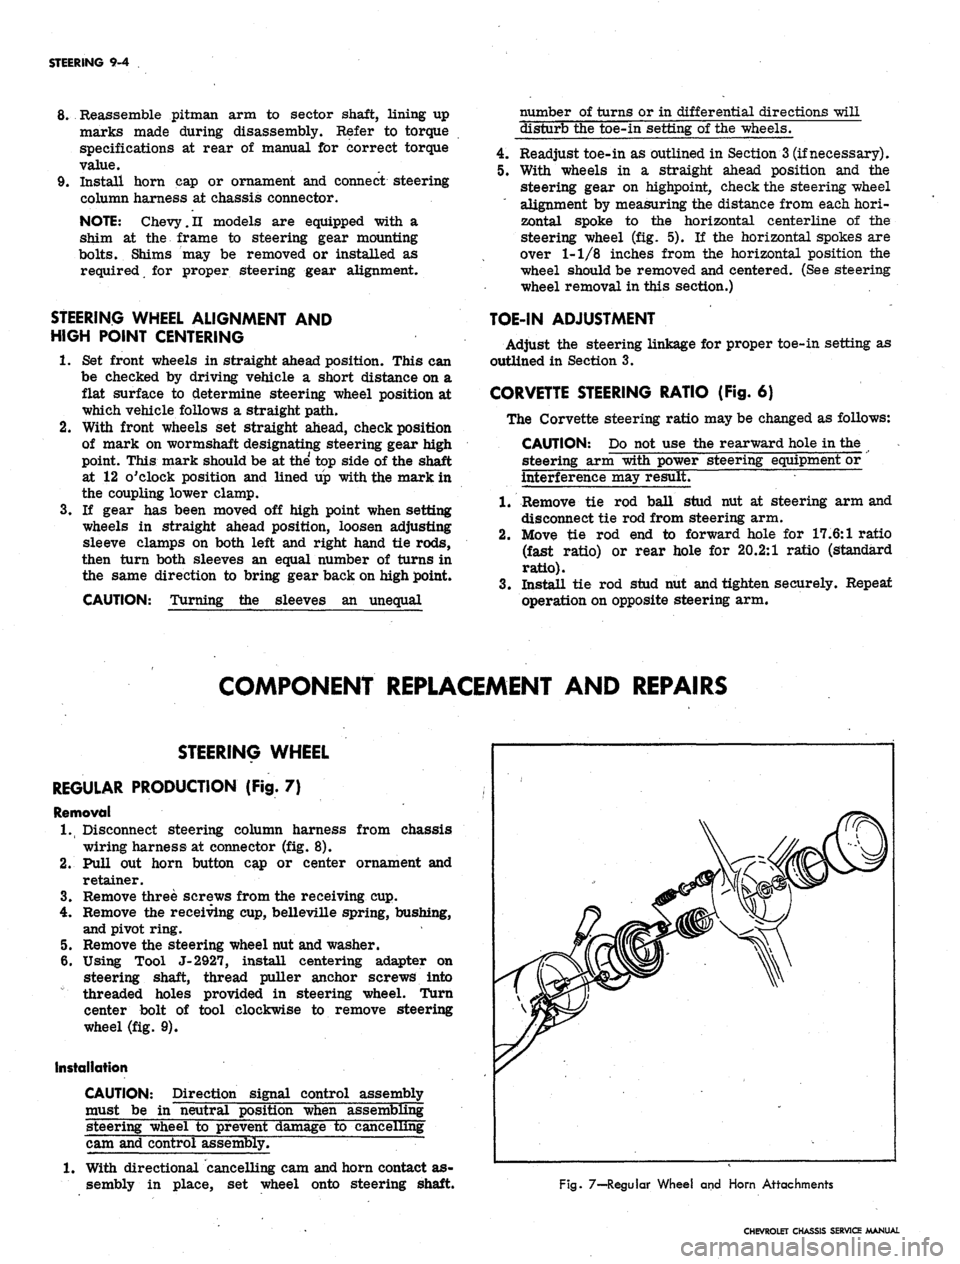 CHEVROLET CAMARO 1967 1.G Chassis Workshop Manual 
STEERING 9-4

8. Reassemble pitman arm to sector shaft, lining up

marks made during disassembly. Refer to torque

specifications at rear of manual for correct torque

value.

9. Install horn cap or 